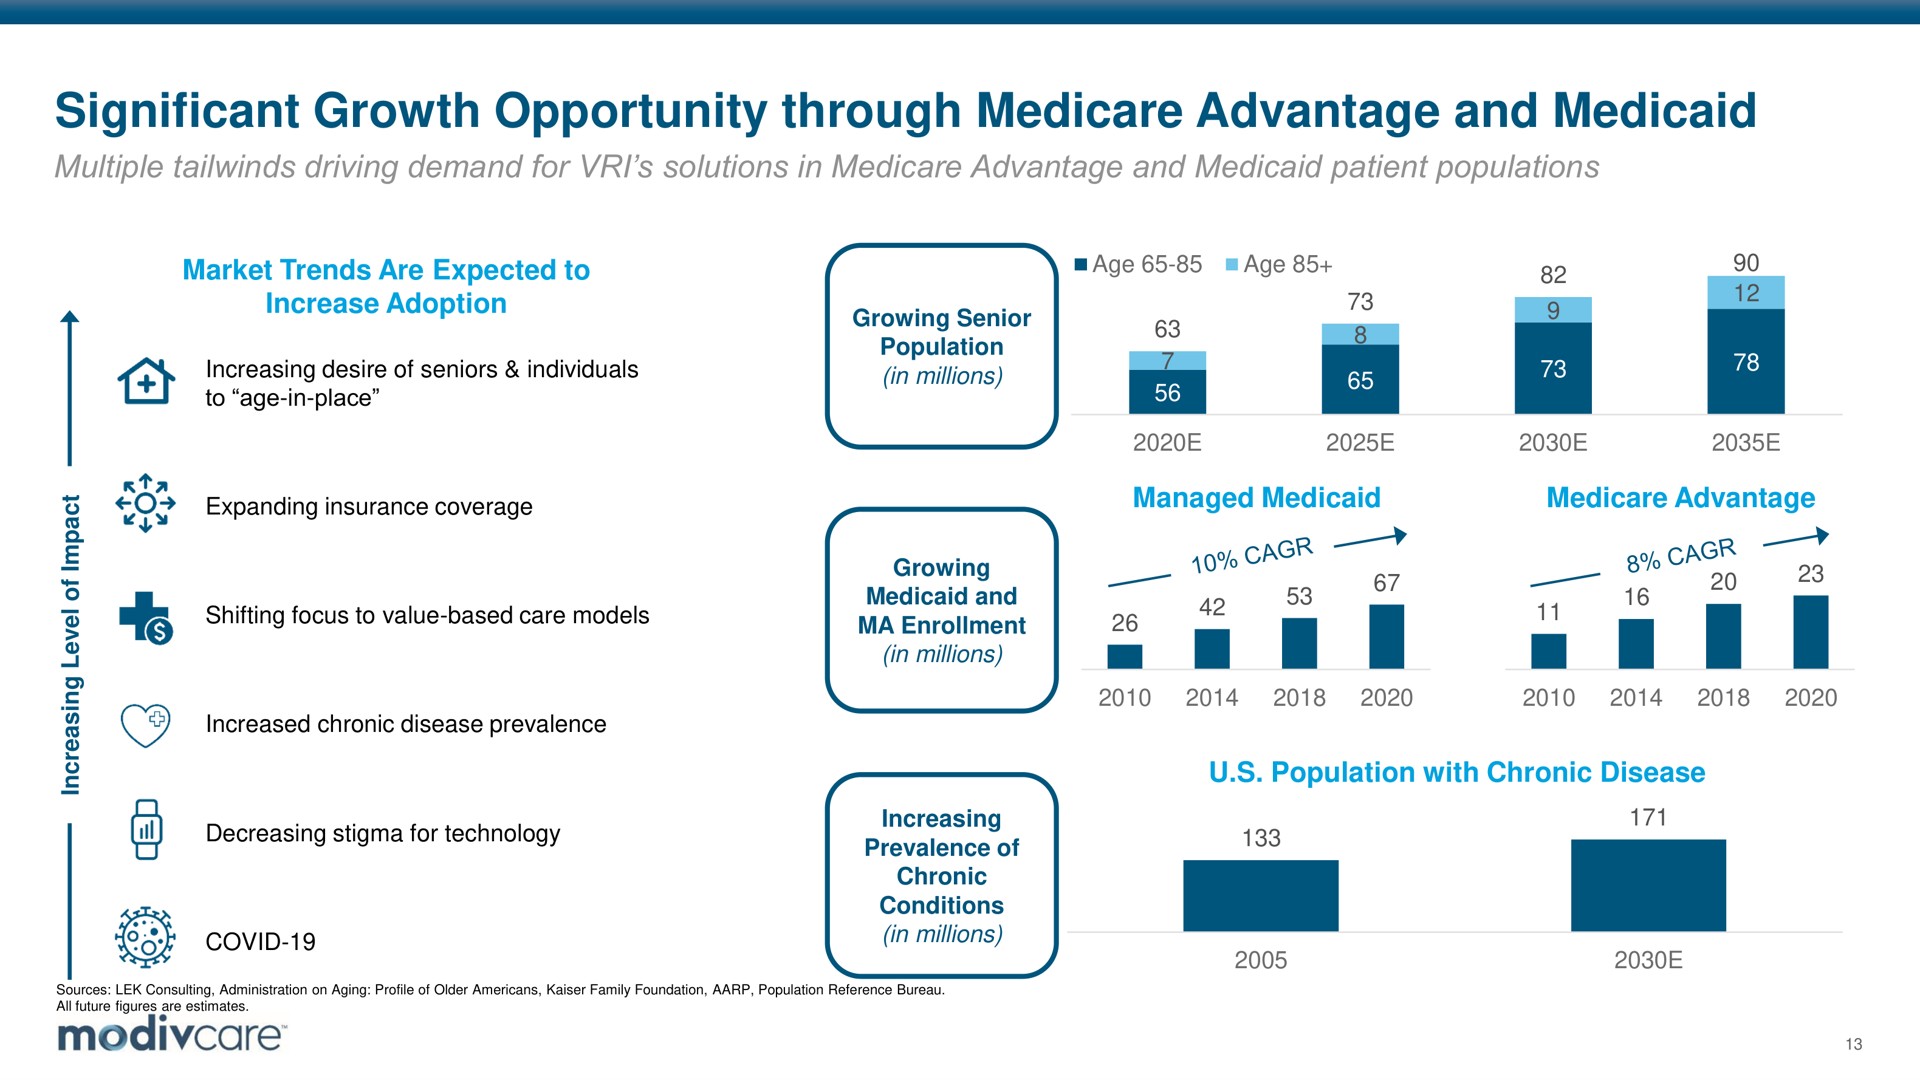 significant growth opportunity through advantage and i a eel a | ModivCare